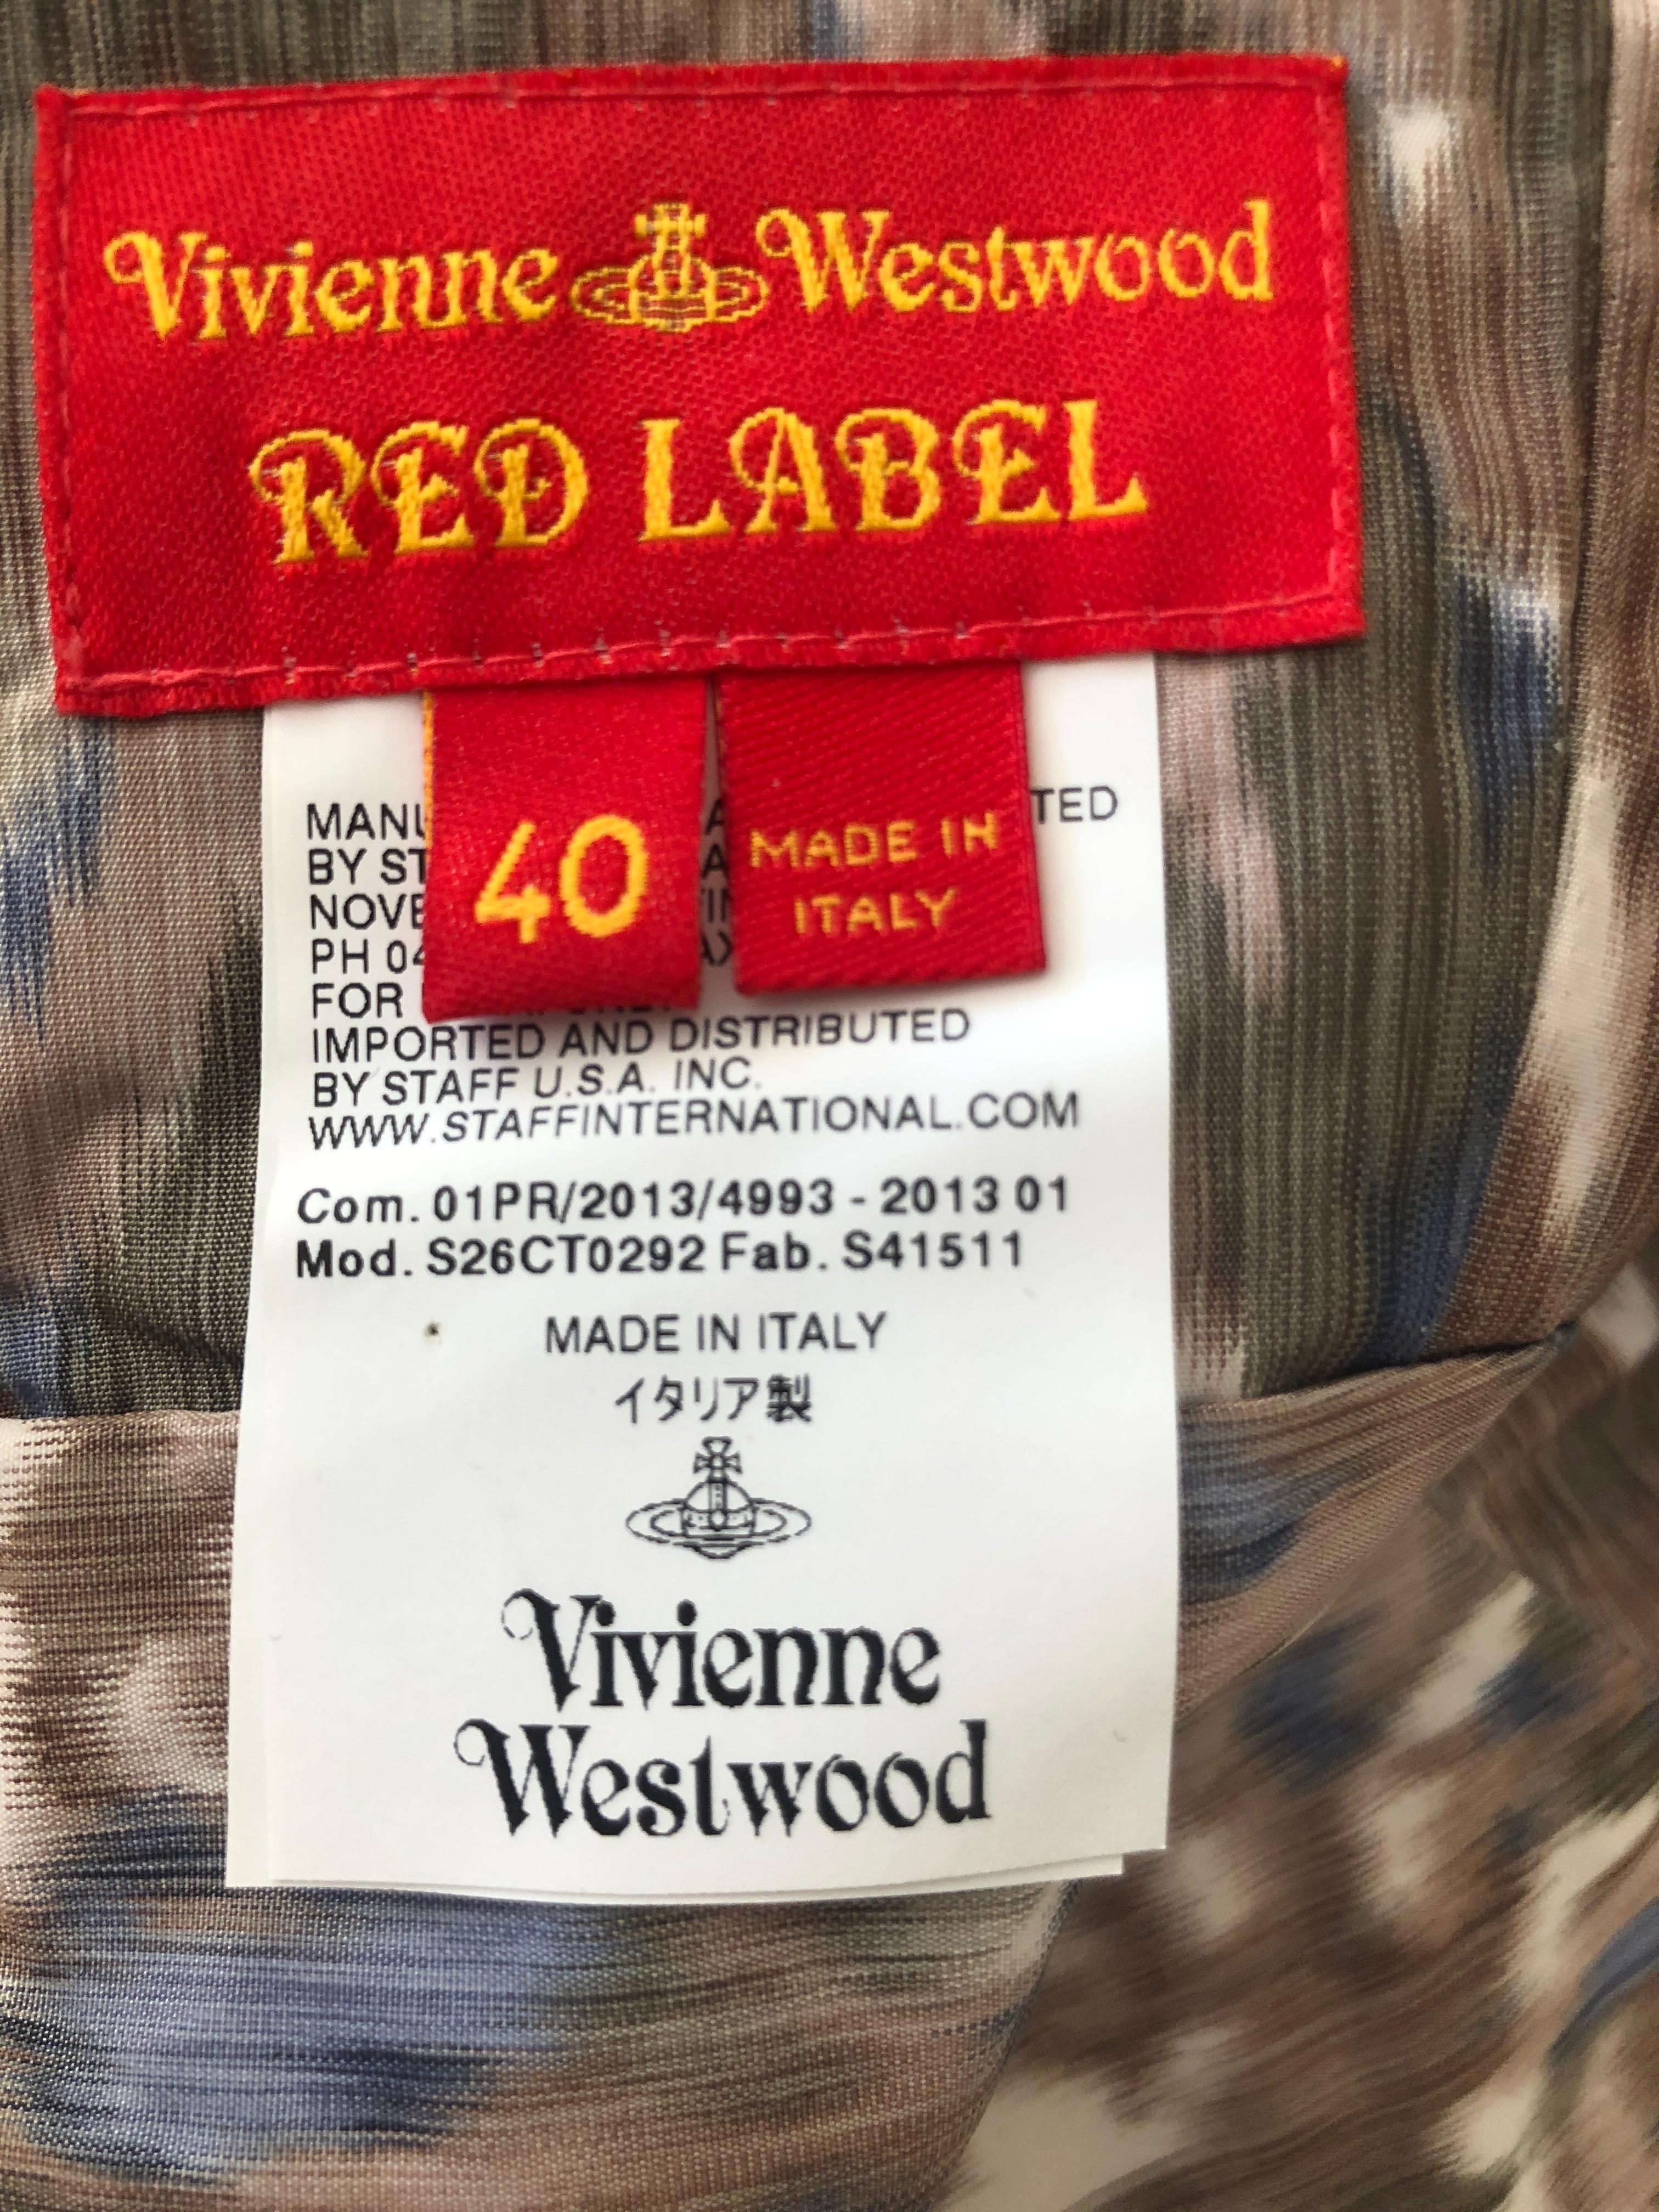 Vivienne Westwood Red Label Taffeta Floral Print 40's Style Dress   For Sale 4